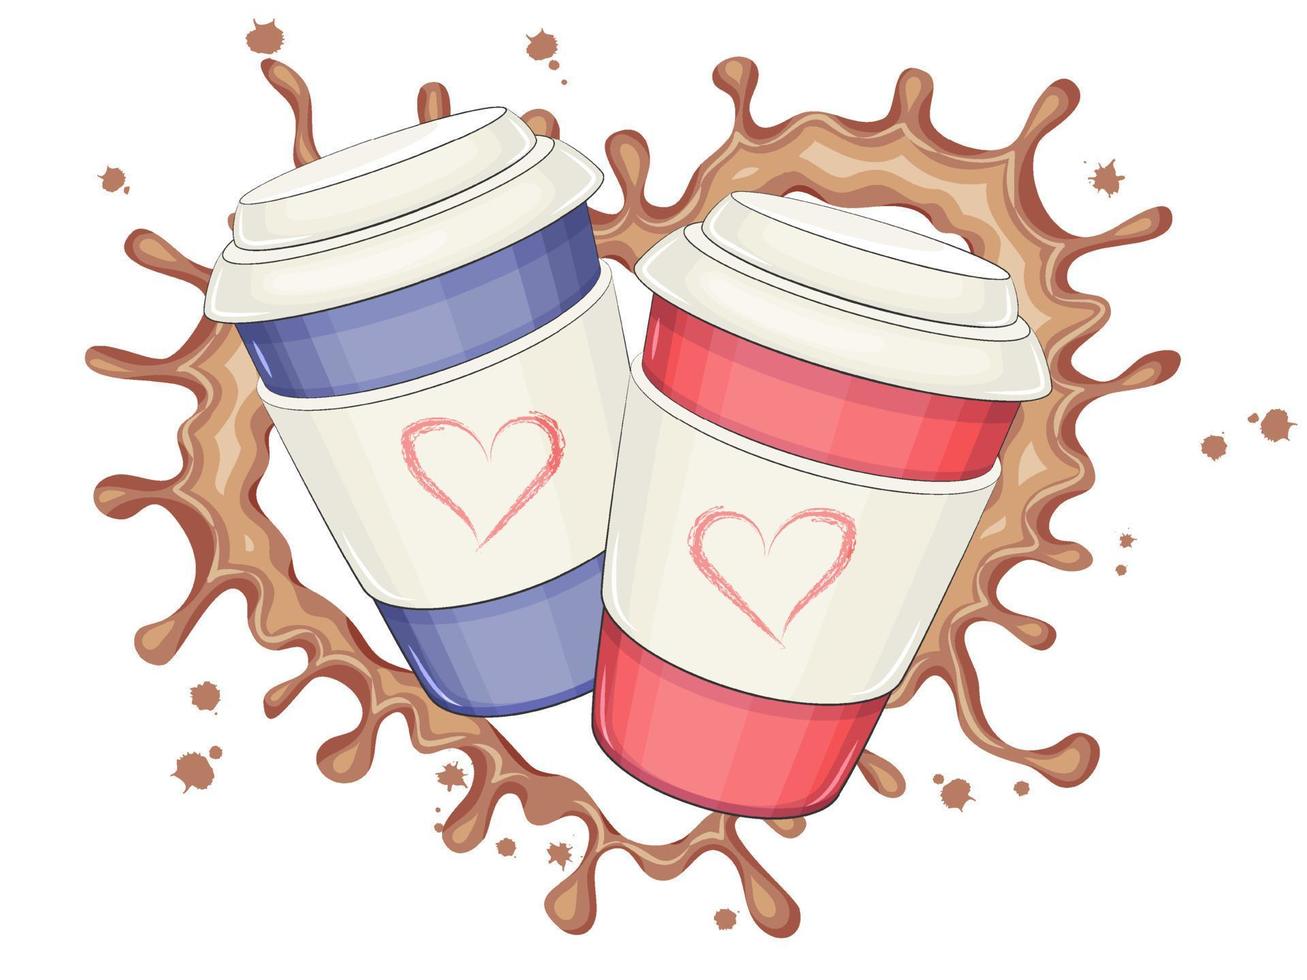 Two cups of coffee, coffee splashes in the shape of a heart. Vector illustration. Cartoon style.